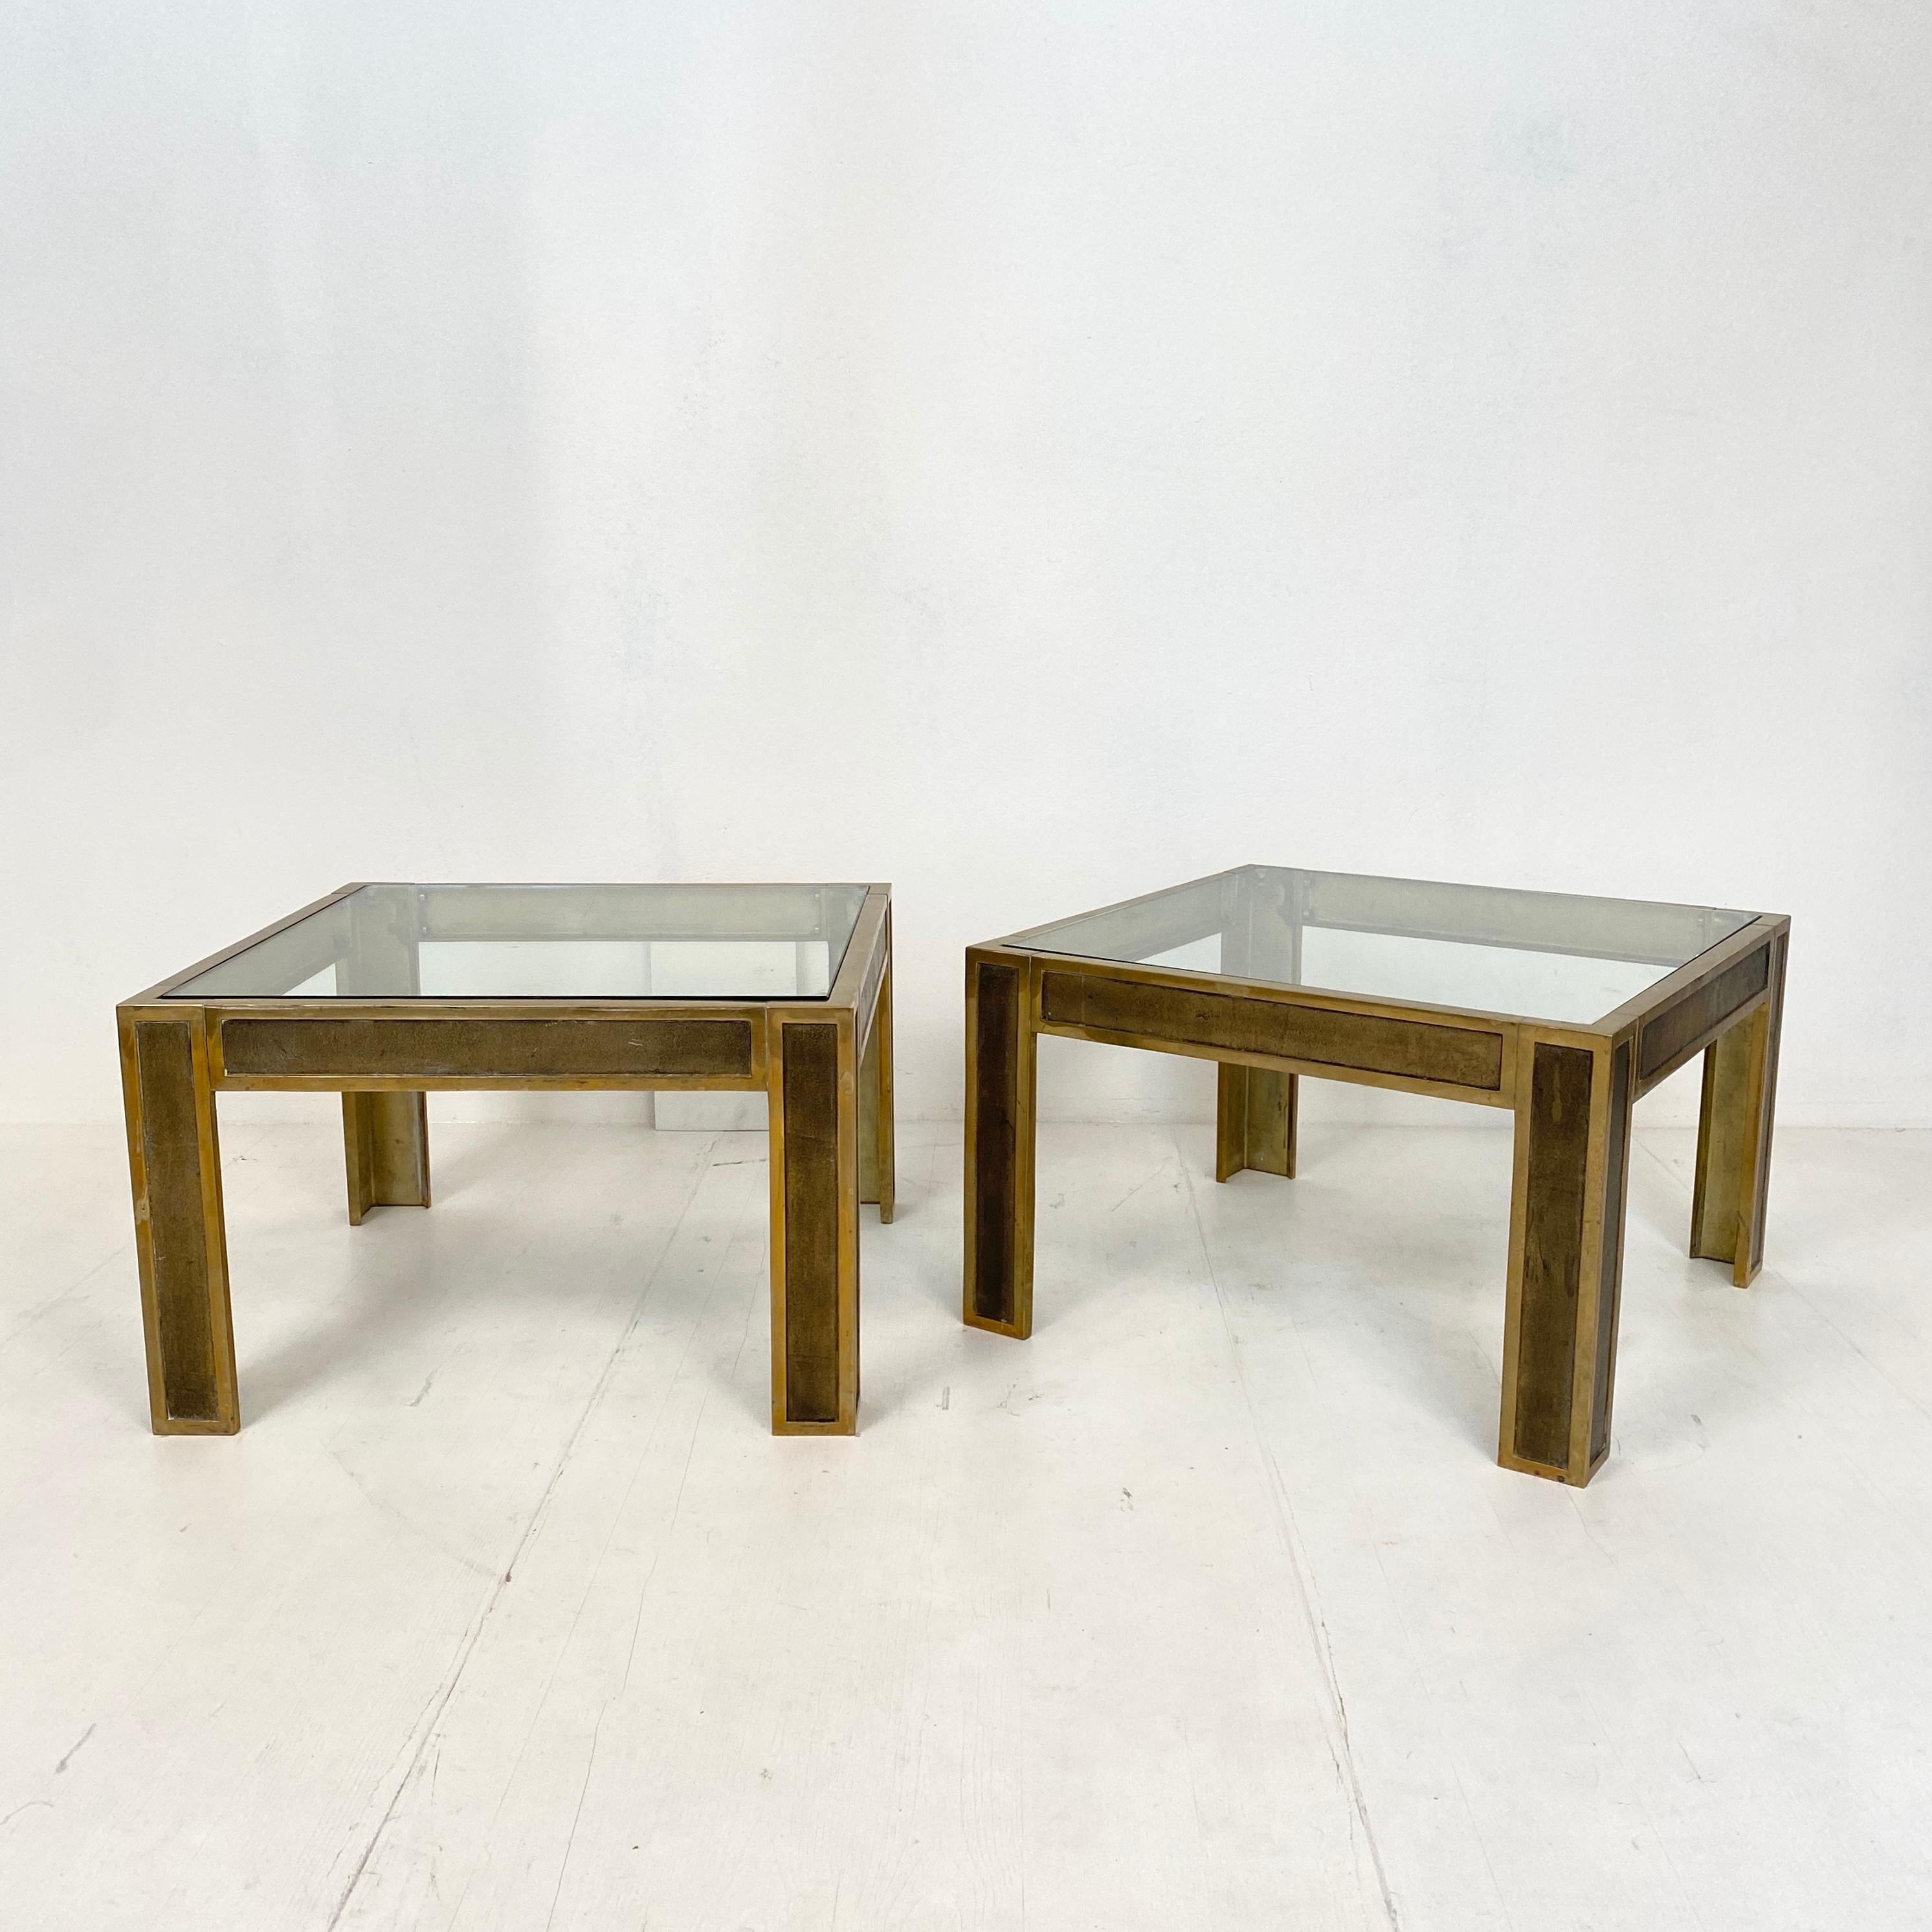 This beautiful pair of mid-century brass and glass sofa tables or coffee tables by Peter Ghyczy
where made in the 1970s. They are made out of heavy brass and a thick glass top.
Wonderful original patina condition.
A unique piece which is a great